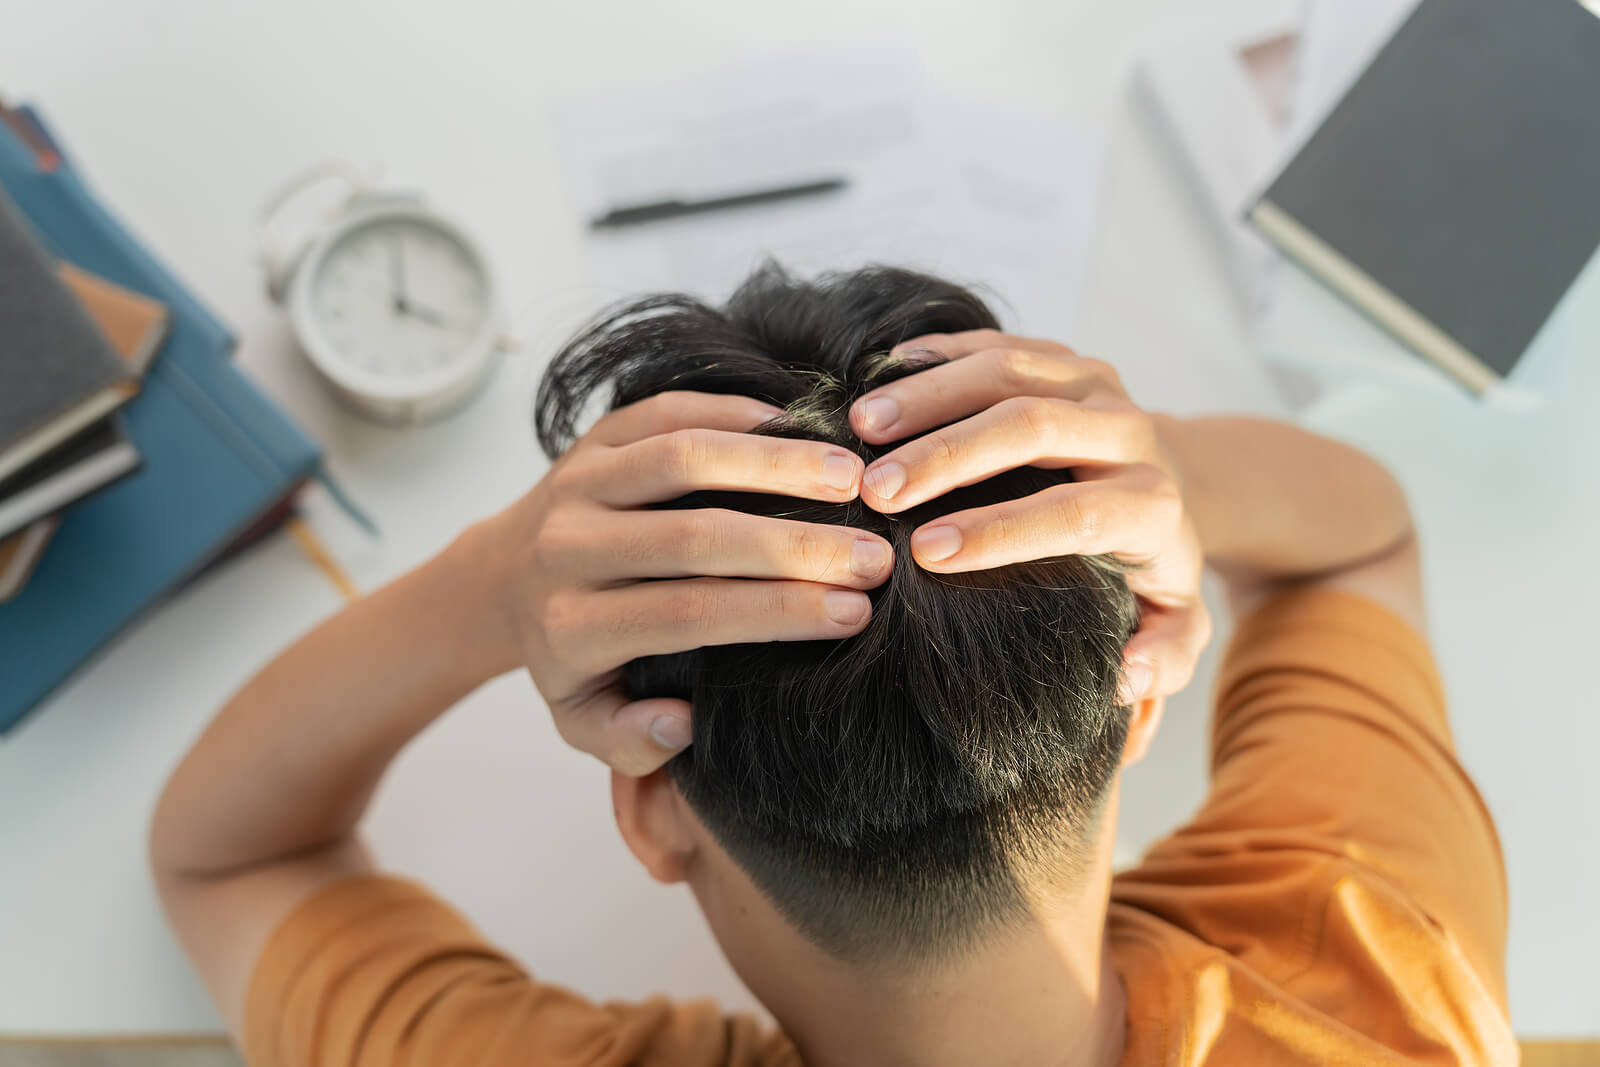 A stressed male student sat at a desk with his head in his hands. Men's mental health concept image.